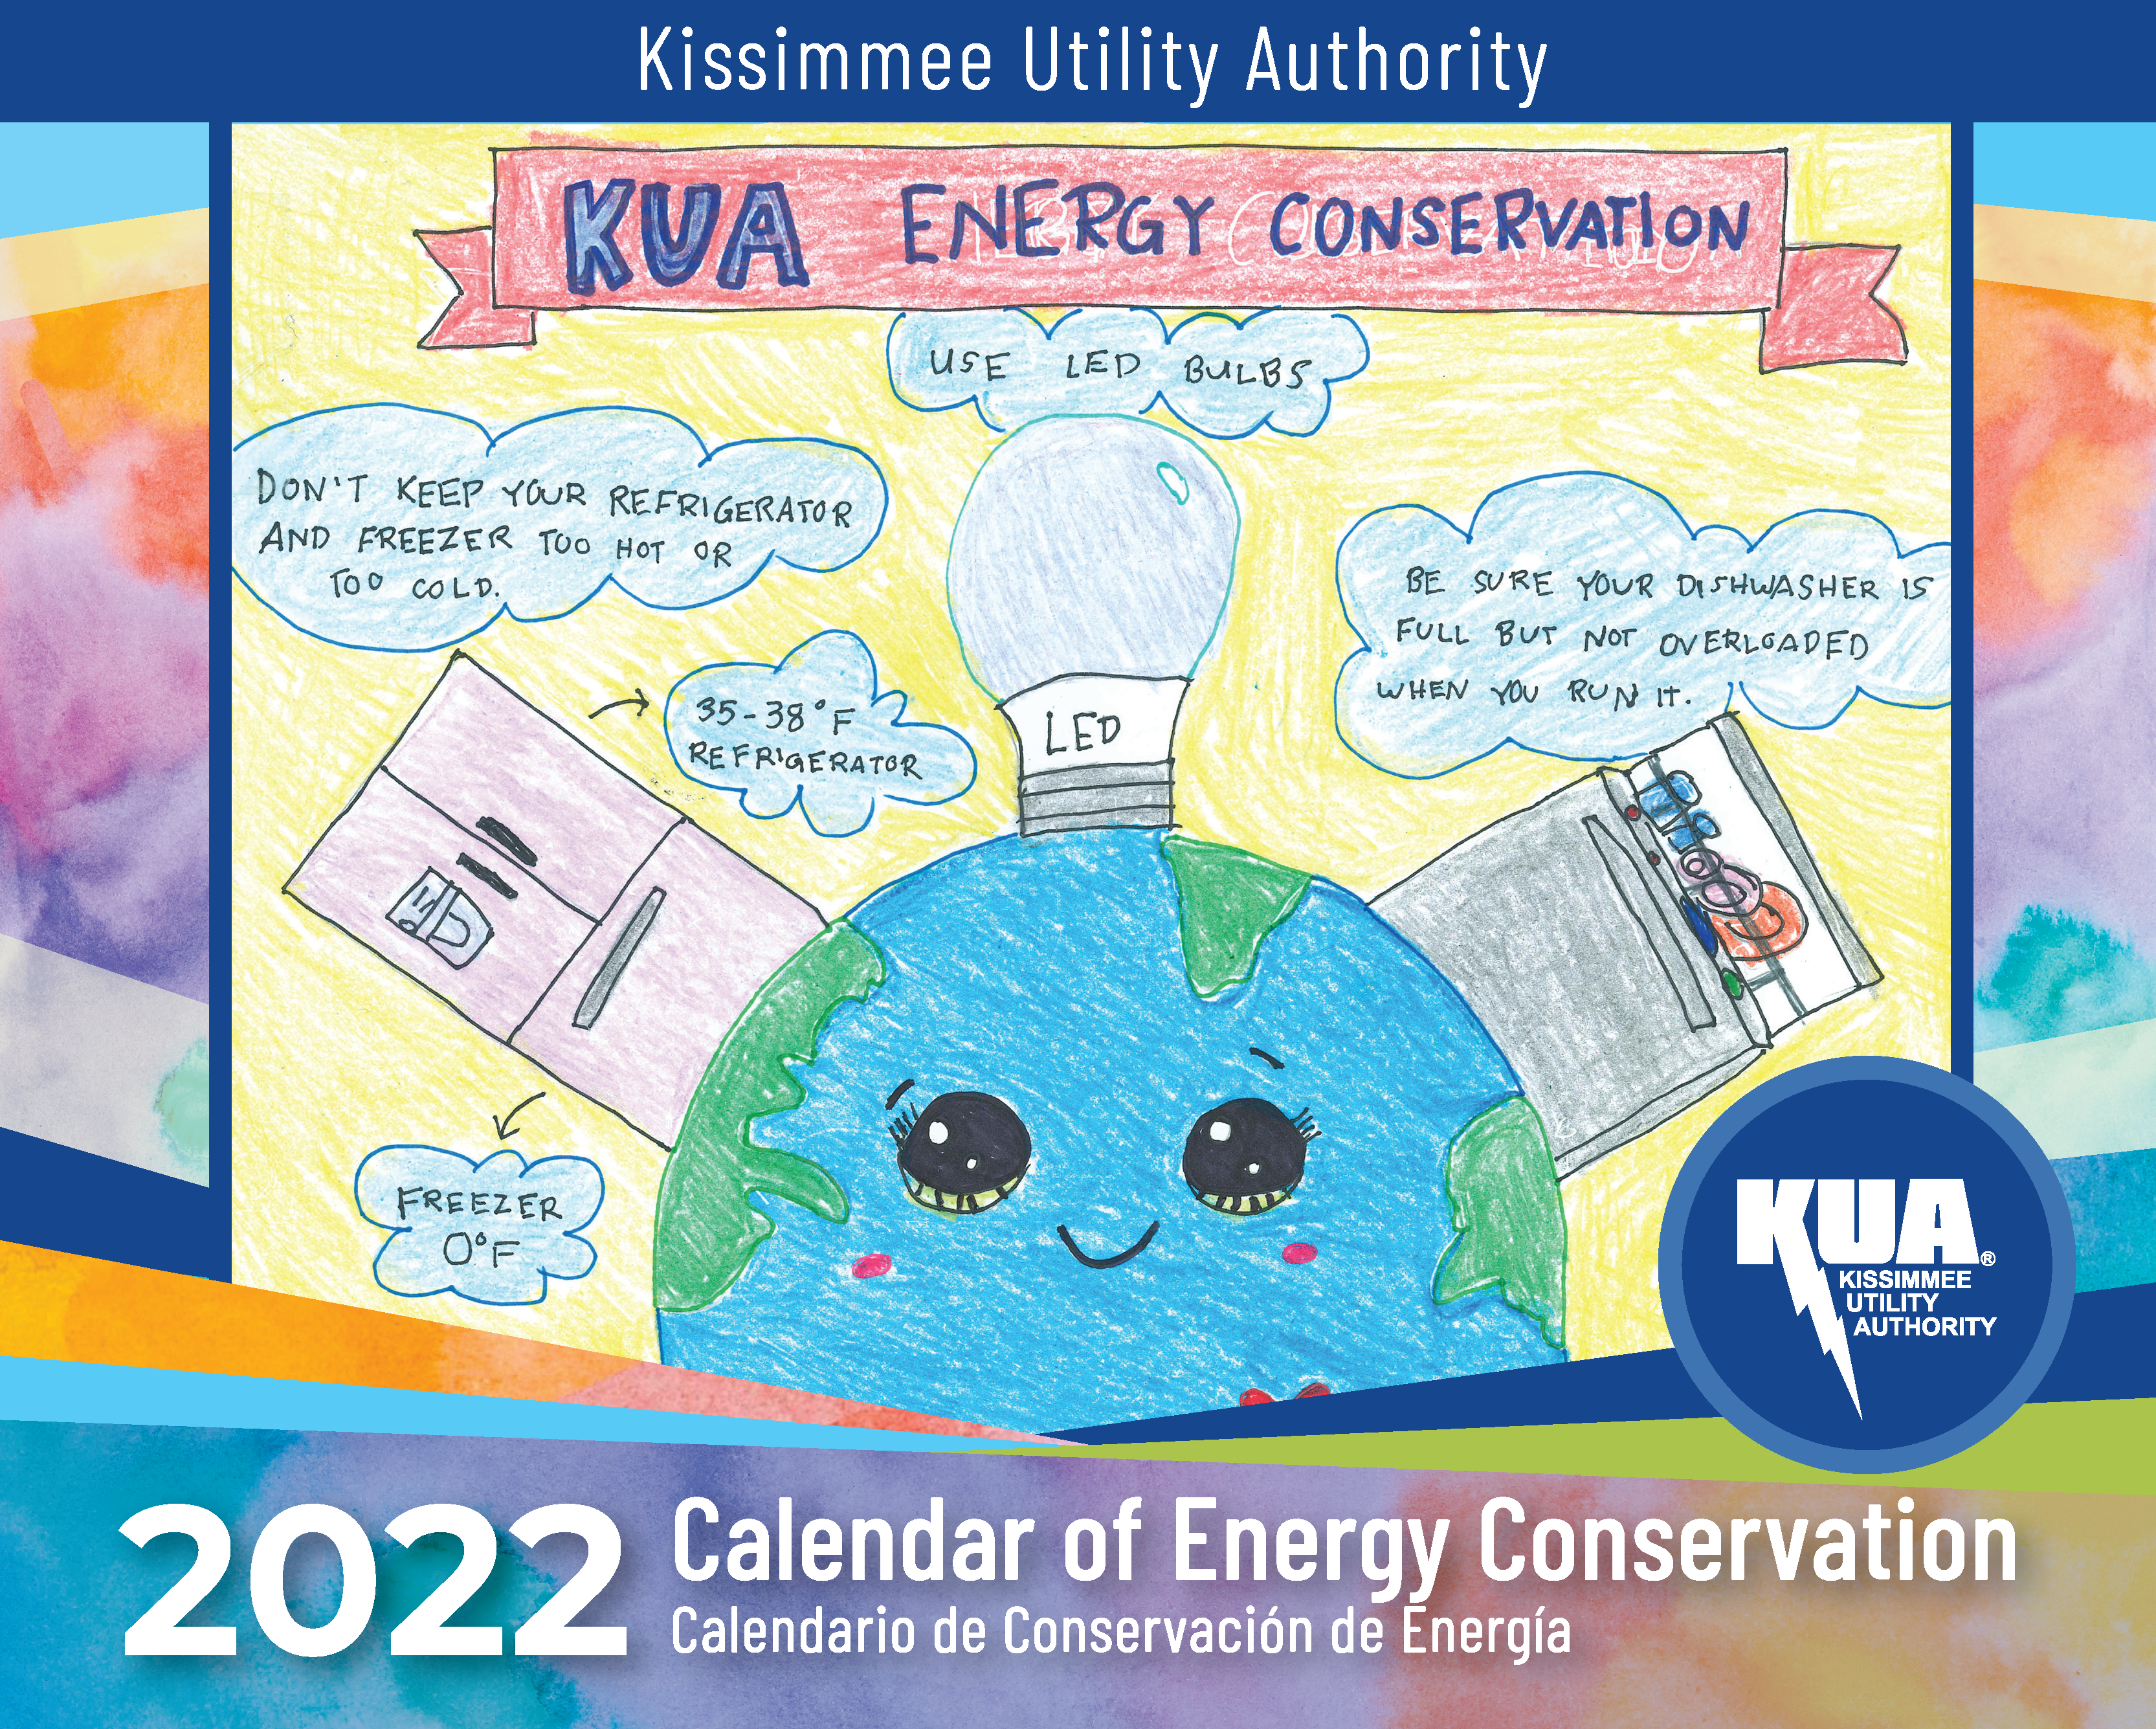 KUA Releases 2022 Calendar of Energy Conservation